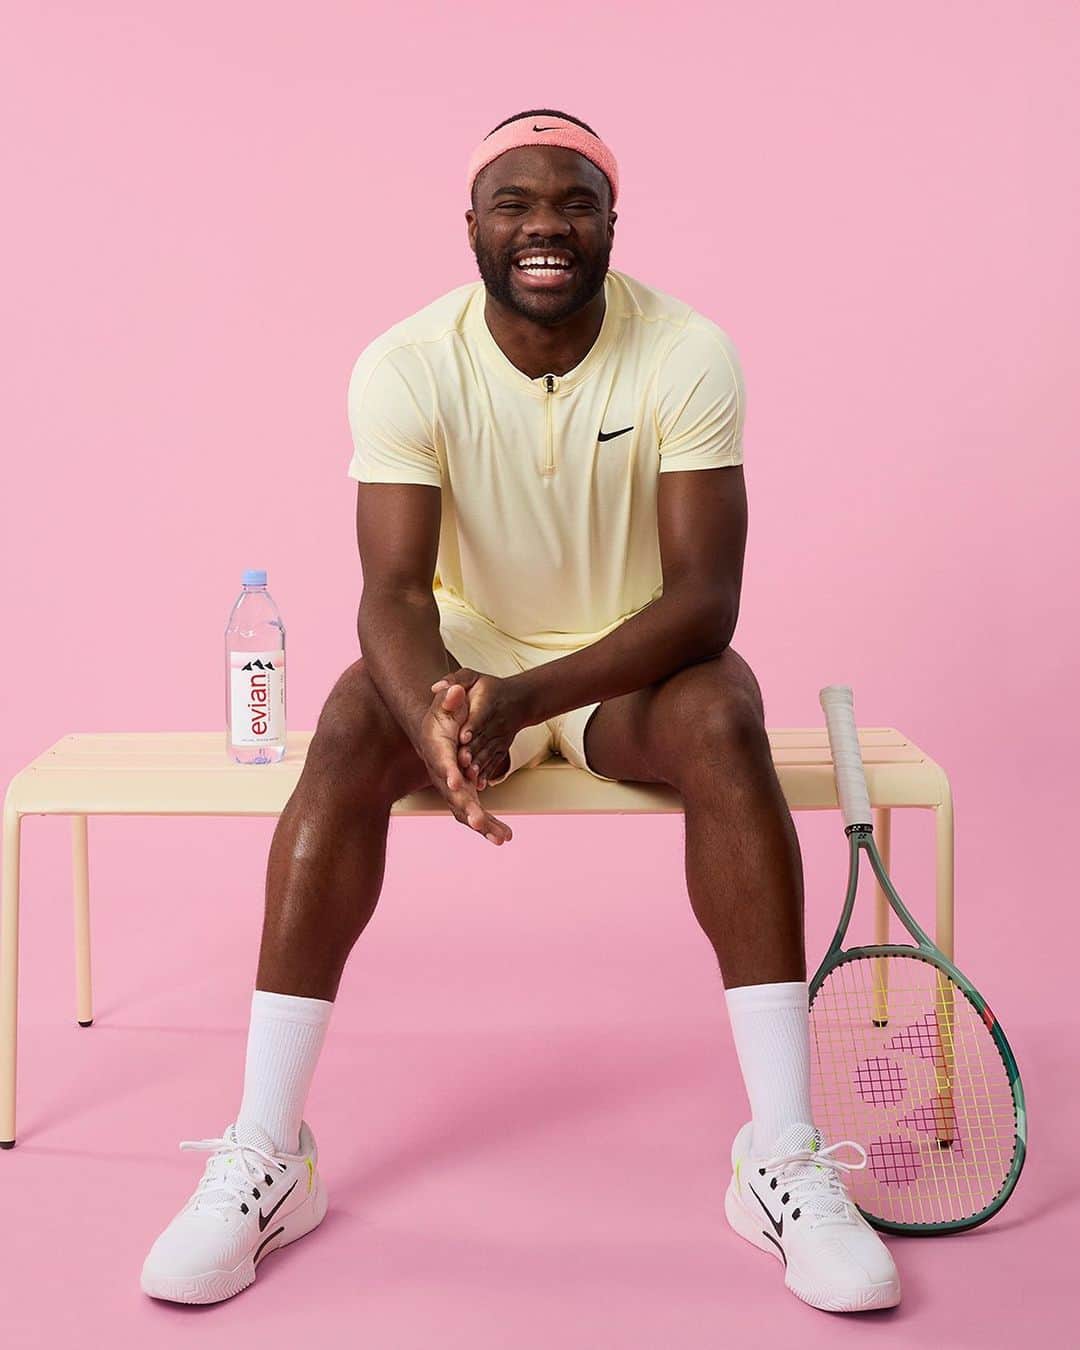 evianのインスタグラム：「A warm welcome to our new Global Brand Ambassador Frances Tiafoe @bigfoe1998 👏🎾​  ​Following in the footsteps of Grand Slam winners, @emmaraducanu and @stanwawrinka85, Frances joins a line-up of iconic worldwide tennis stars who keep hydrated on and off the court with evian as part of their daily wellness habits. 💧​  Frances’ authentic and upbeat 'be-myself' attitude aligns perfectly with our #LiveYoung spirit. We’re so happy he has joined the evian family!​  #evian #FrancesTiafoe #Tennis #evianxFrances」